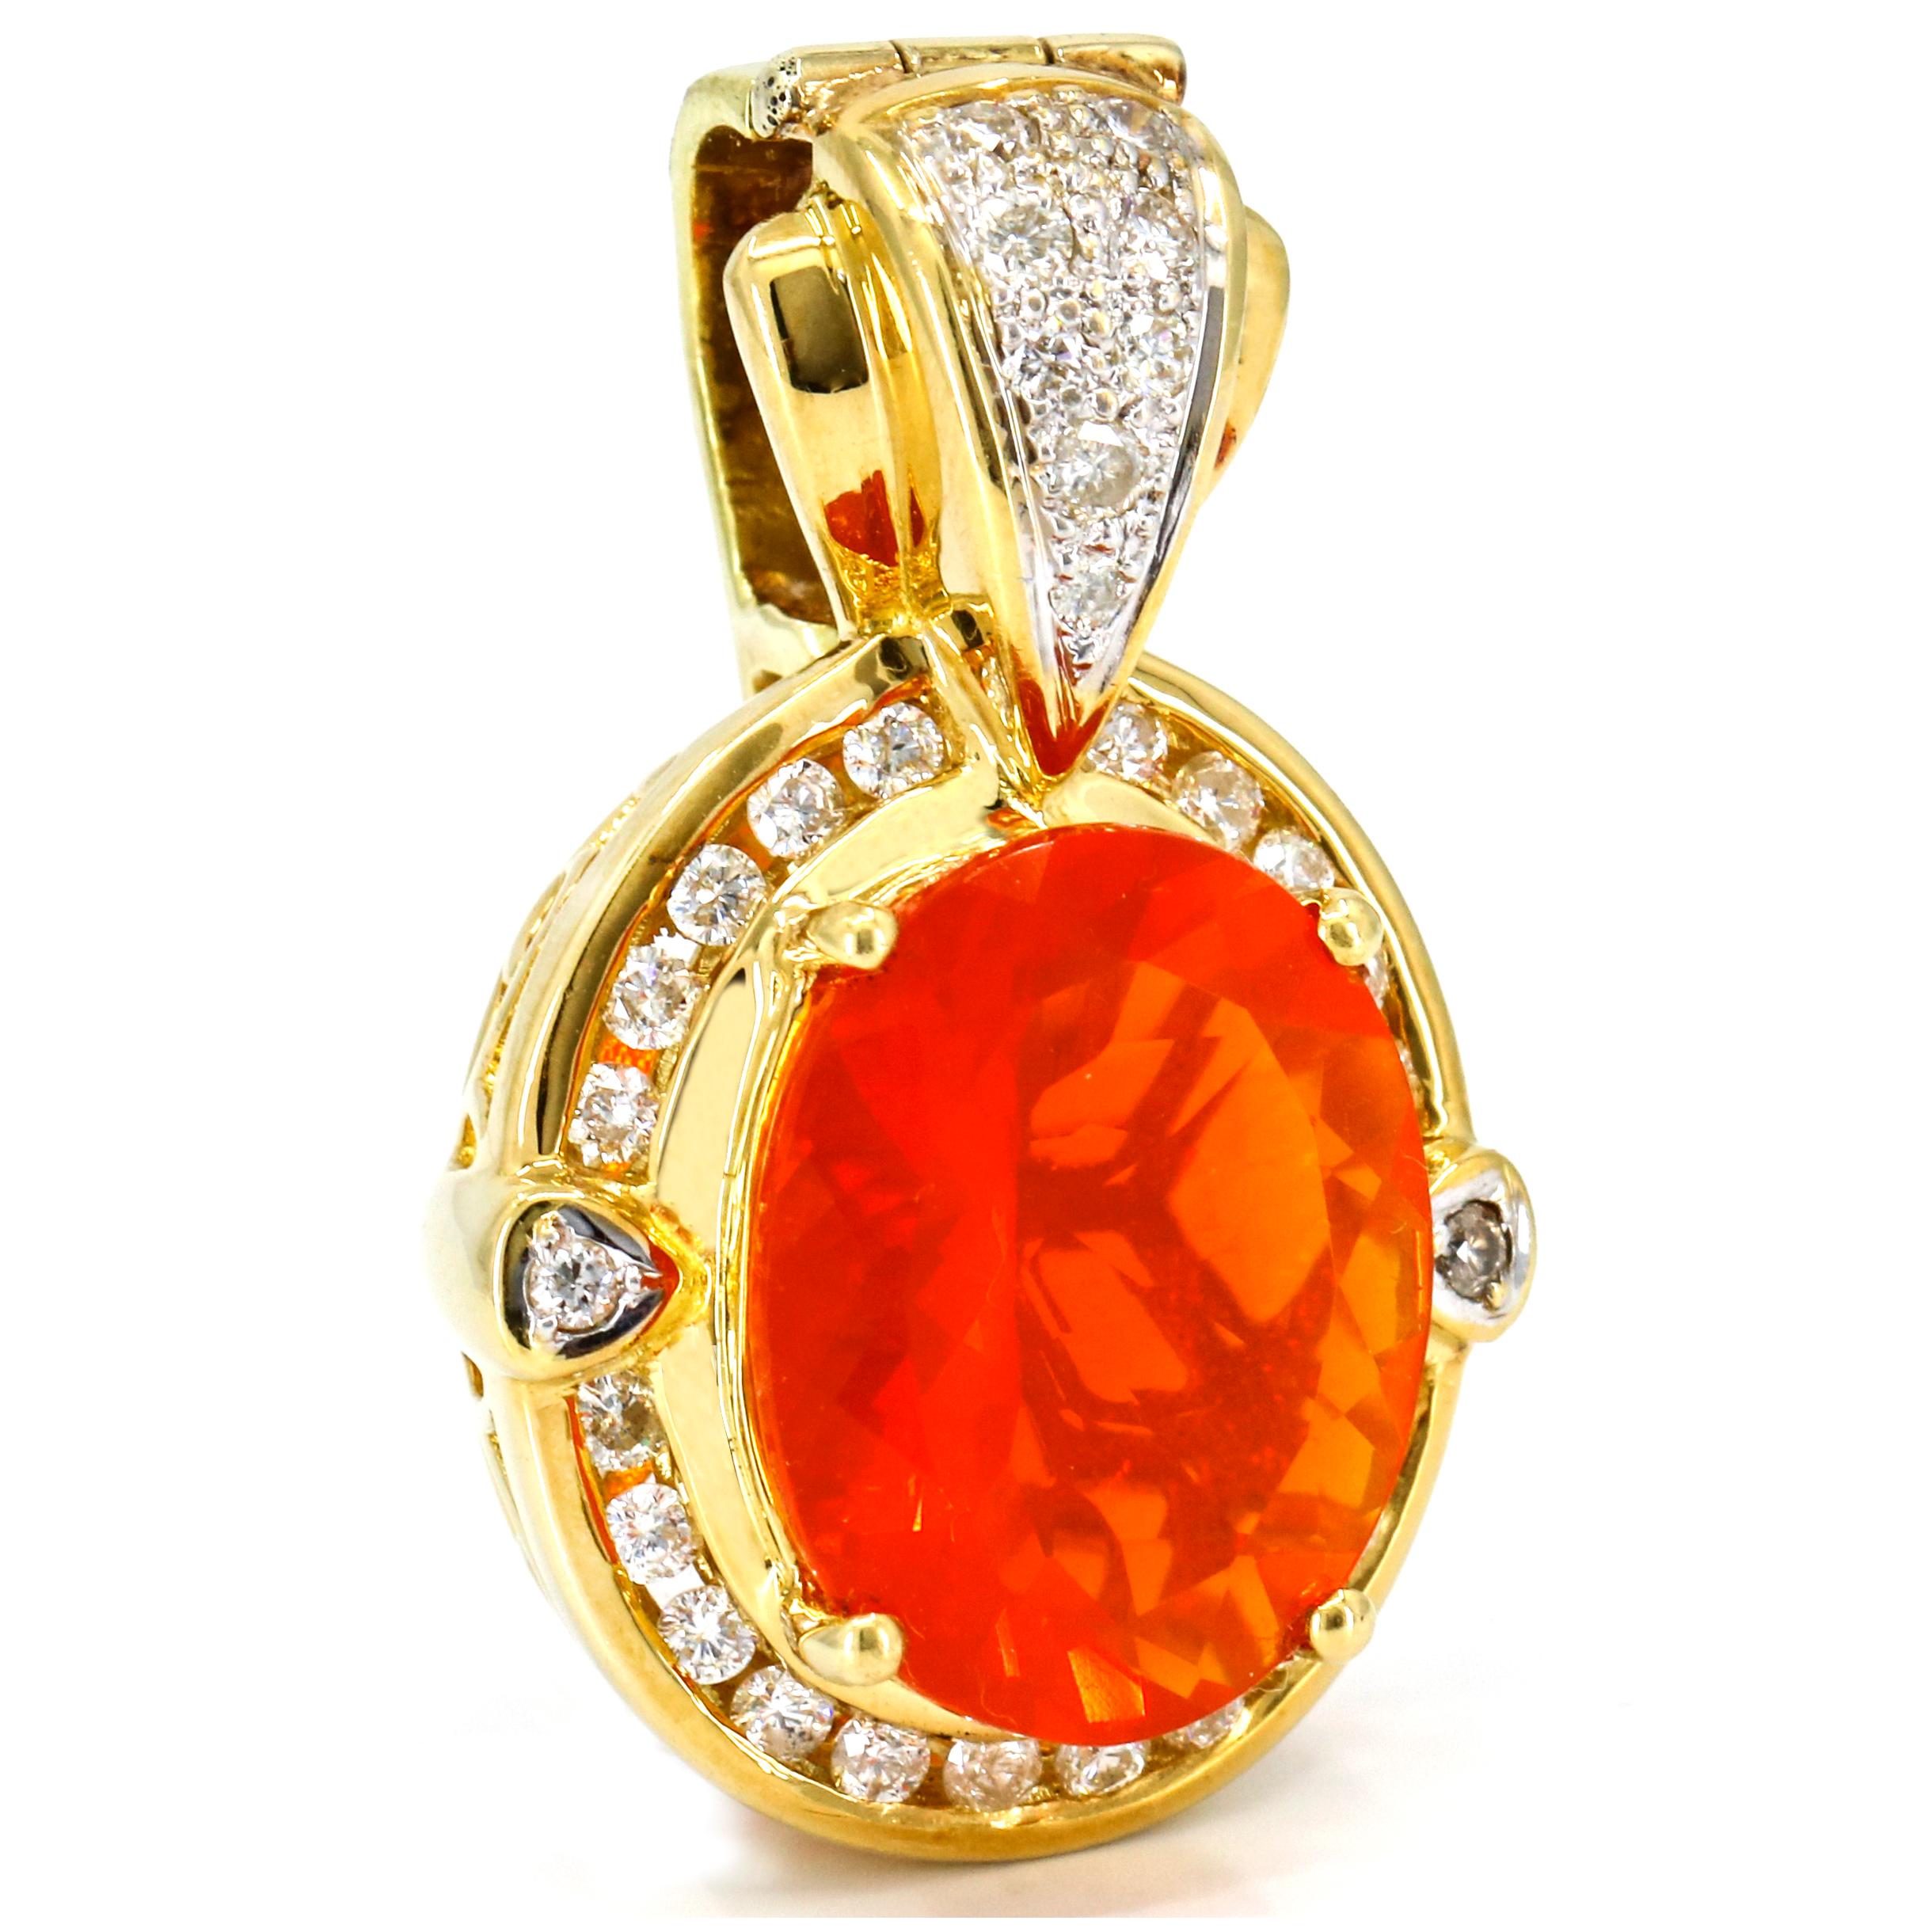 Oval fire opal and diamond pendant with enhancer bail in 18-karat yellow gold. Polished metal setting prong set with a large oval-cut natural opal at center surrounded by numerous round-cut diamonds. 

Height, 18.5mm
Width, 17.5mm
Depth,